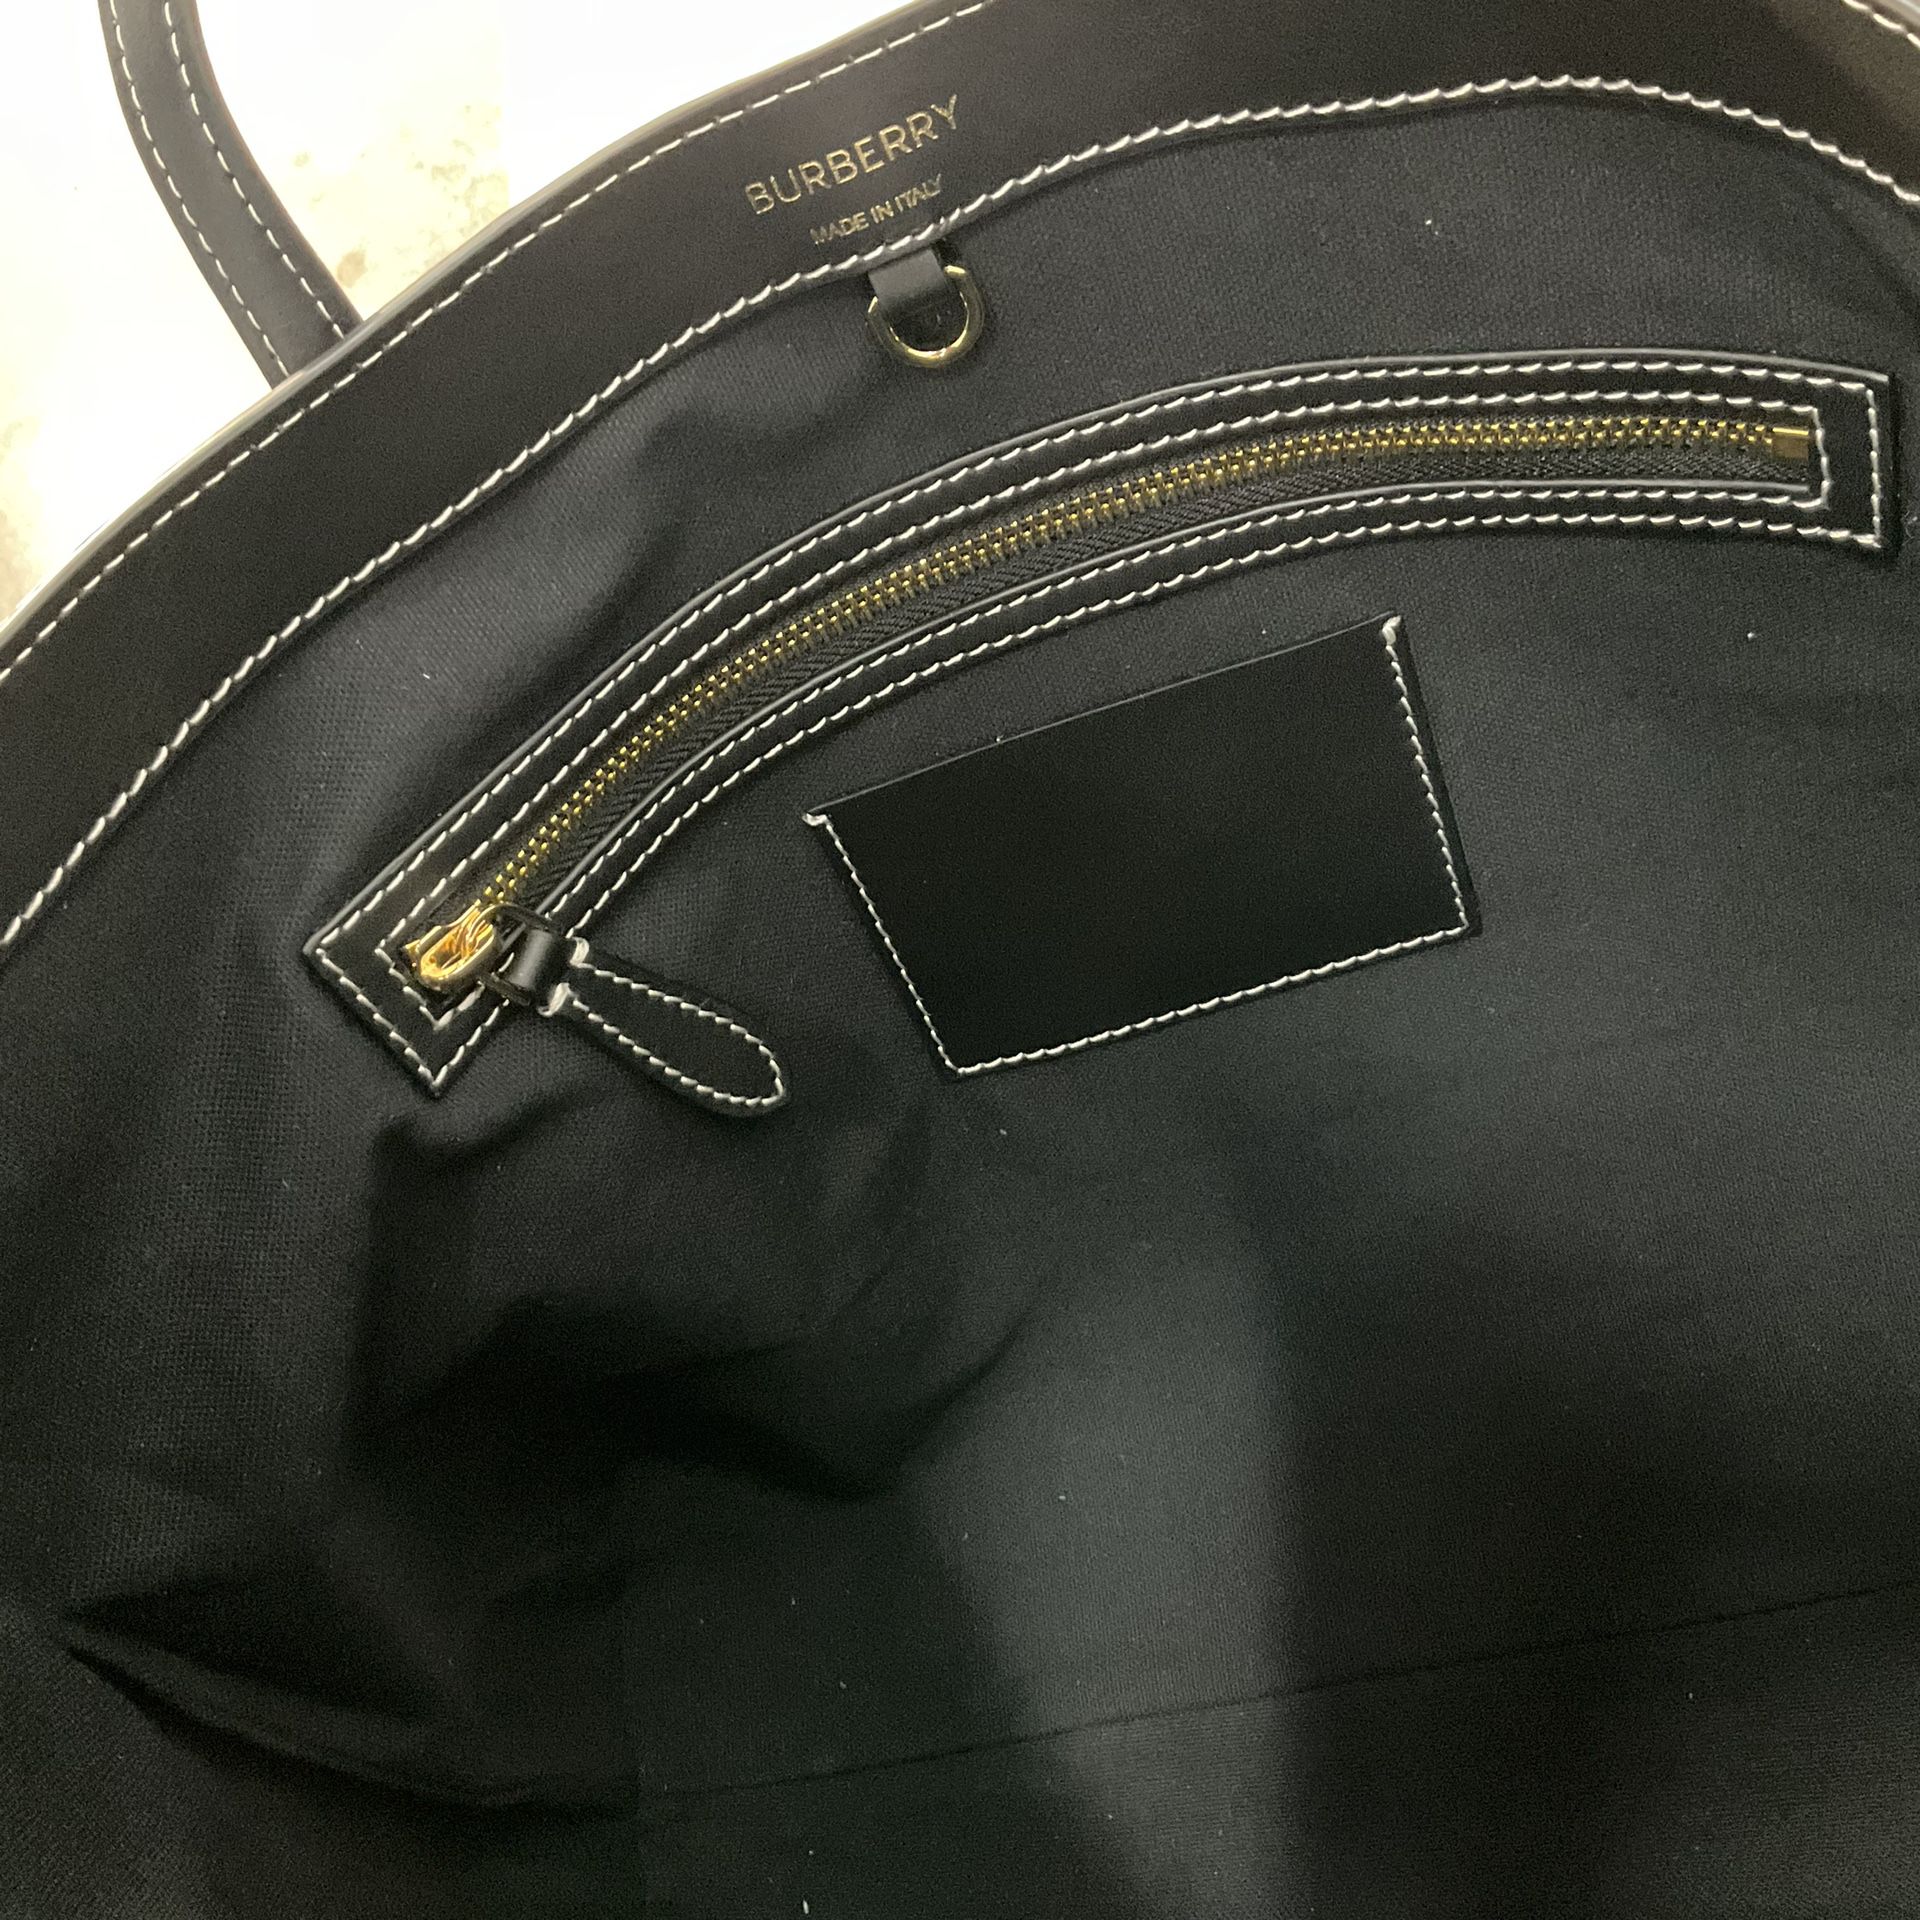 NWT Burberry Leather Banner Tote Bag for Sale in Miami Beach, FL - OfferUp